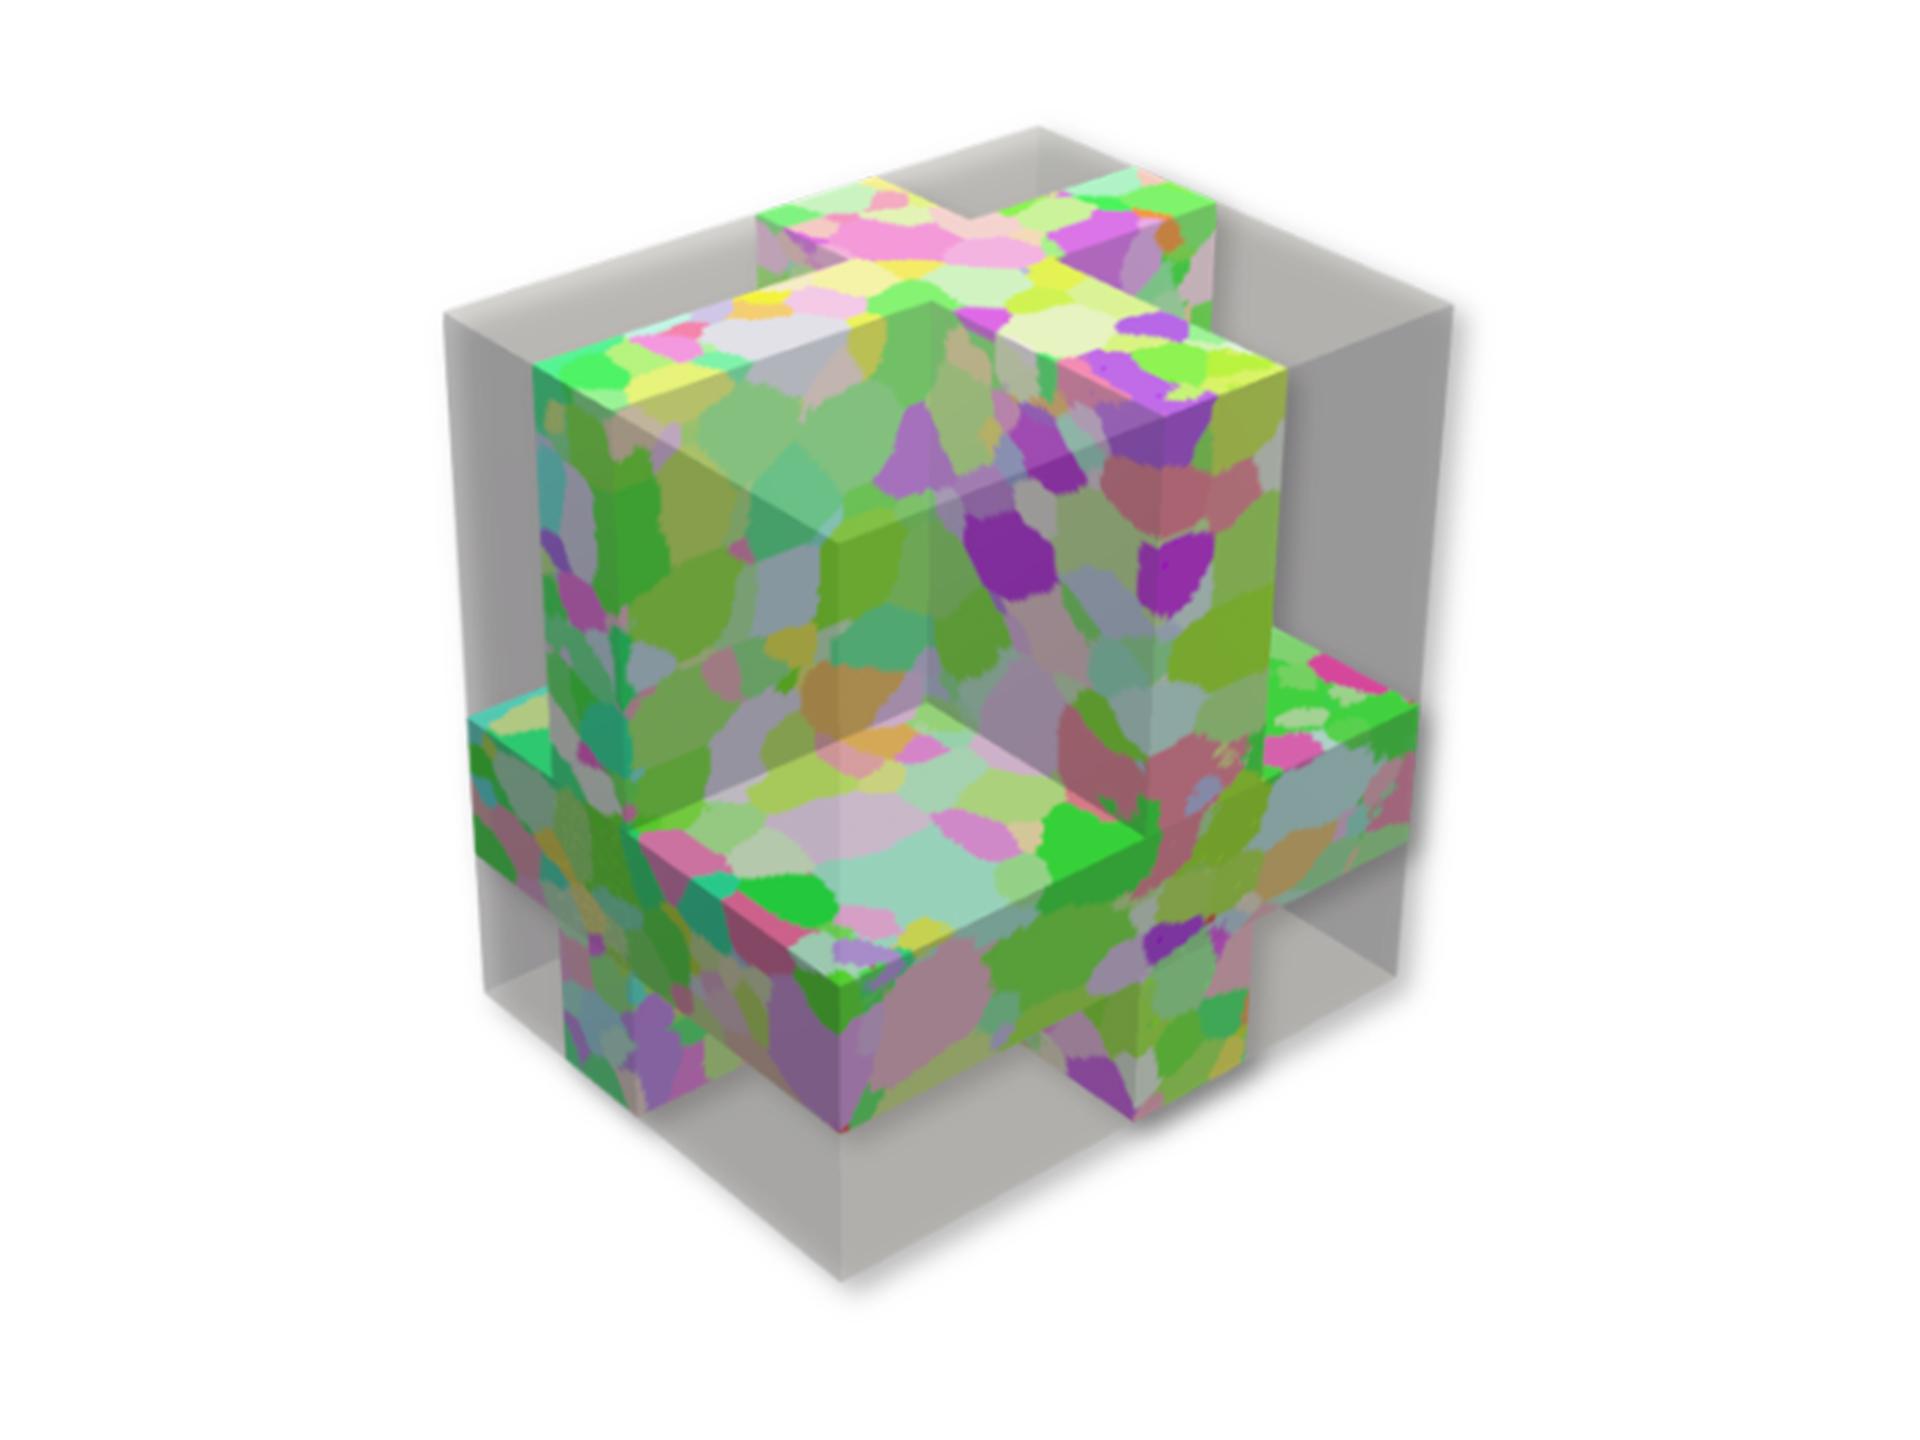 3D Grain Mapping